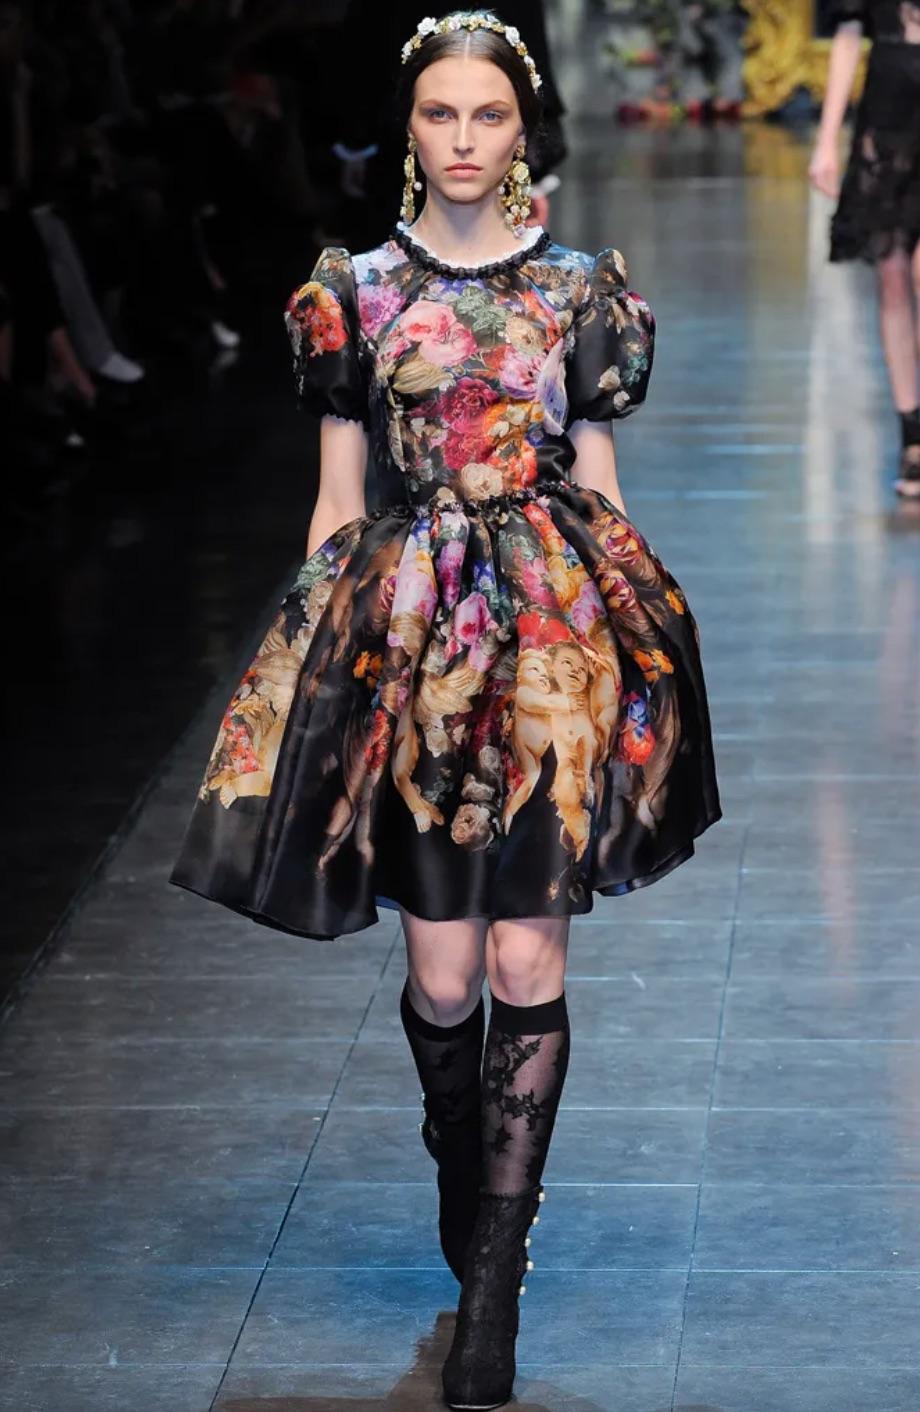 The Dolce & Gabbana cherub dress from their Fall/Winter 2012 collection is one of the brand's most wanted and recognizable piece of the last decade. The iconic multicolor print features cherubs and florals and is truly a work of art. The short